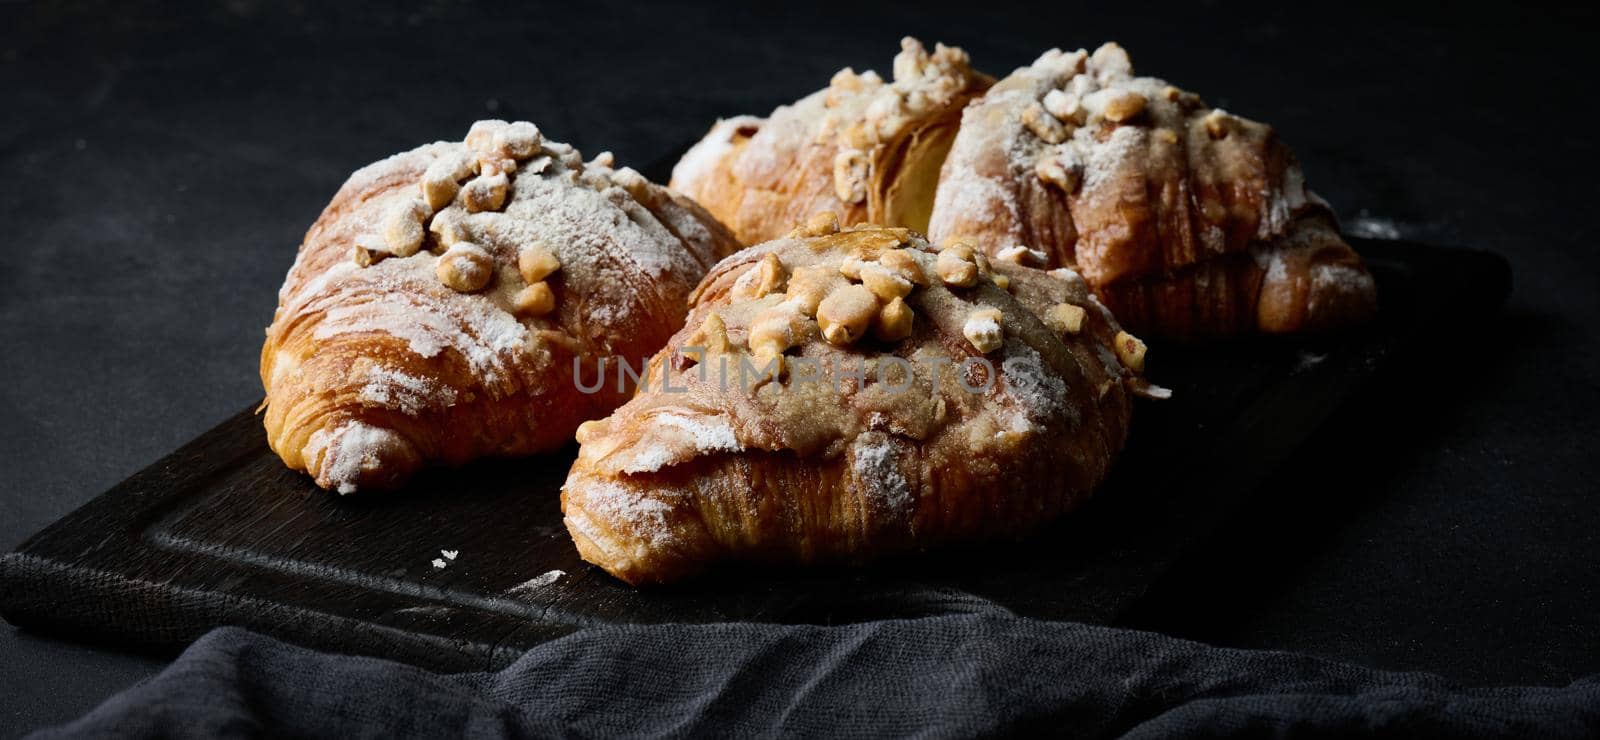 Baked croissants on a black wooden board sprinkled with powdered sugar, close up